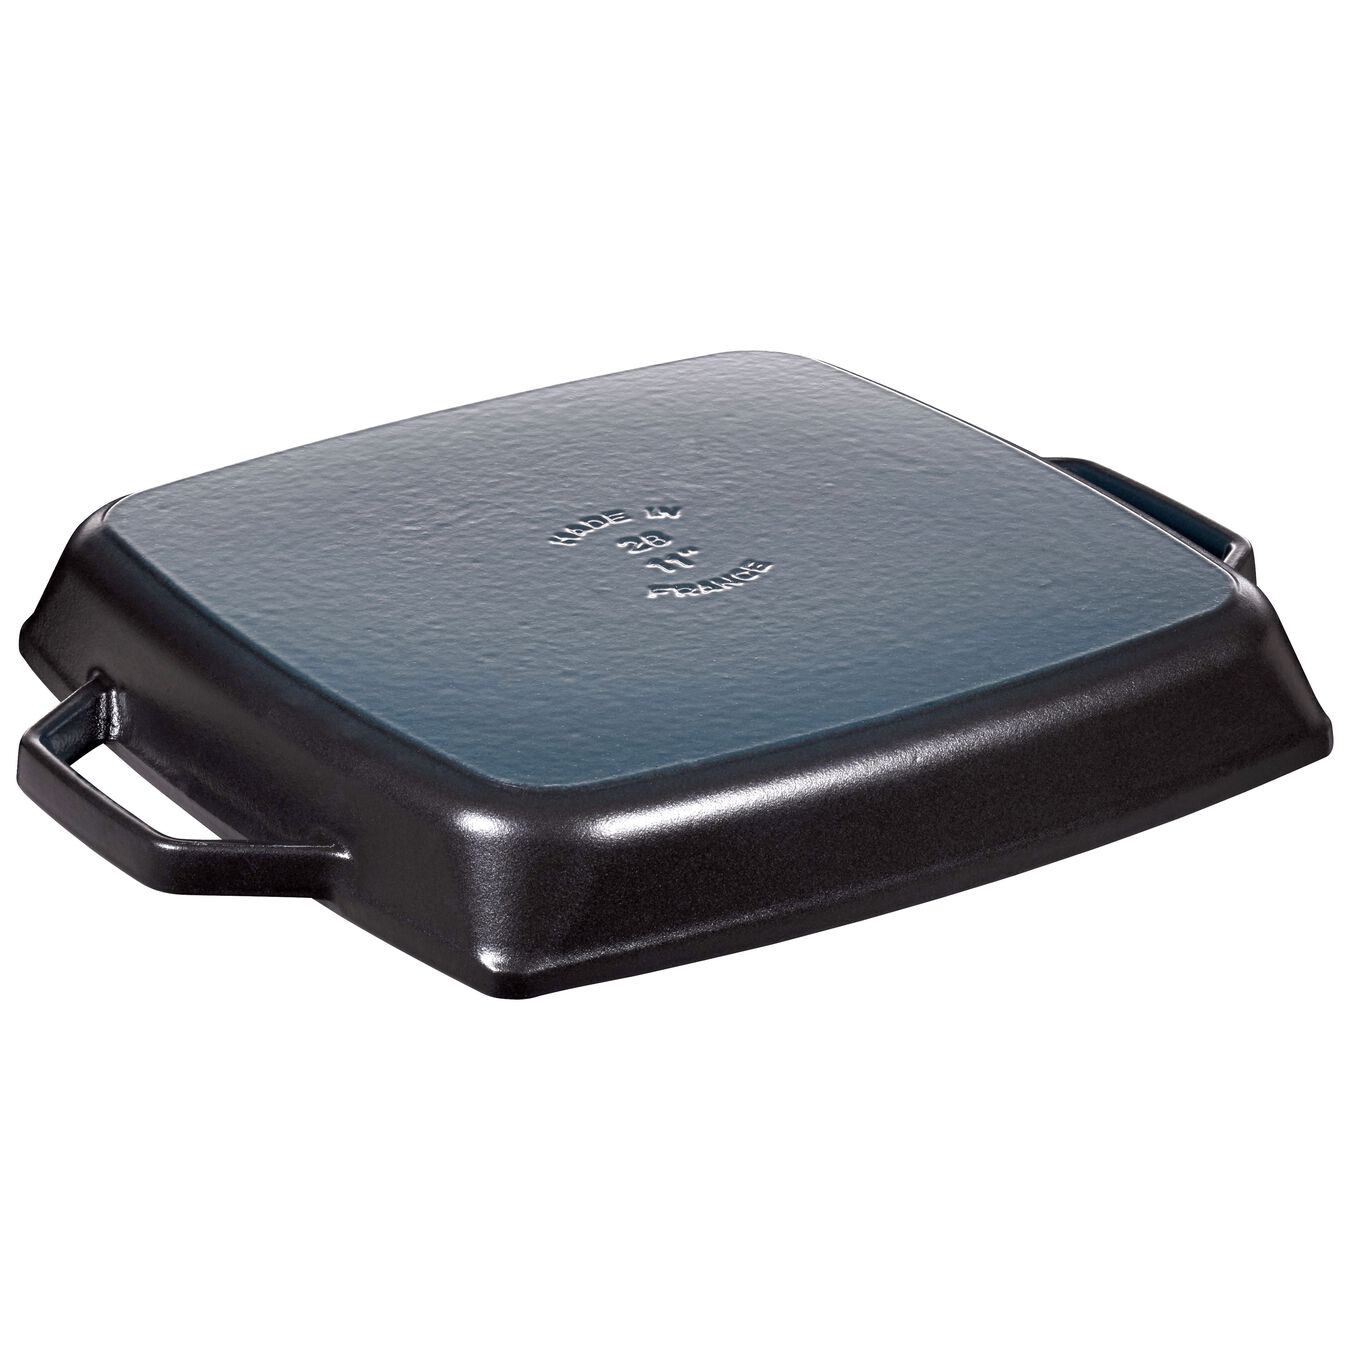 28 cm / 11 inch cast iron square Grill pan, black - Visual Imperfections,,large 2